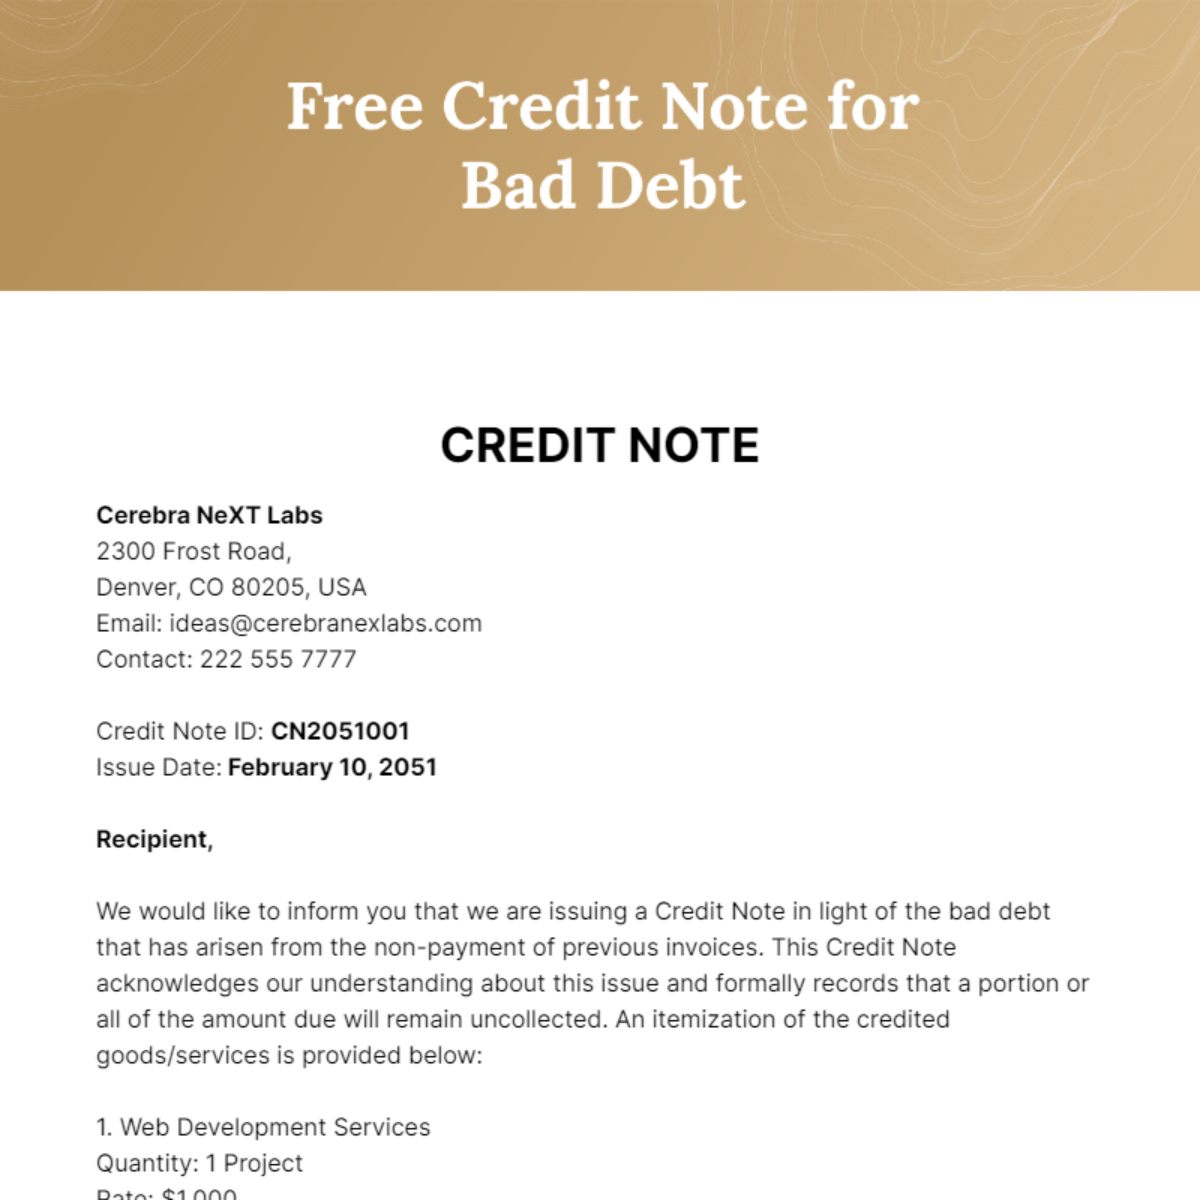 Credit Note for Bad Debt Template